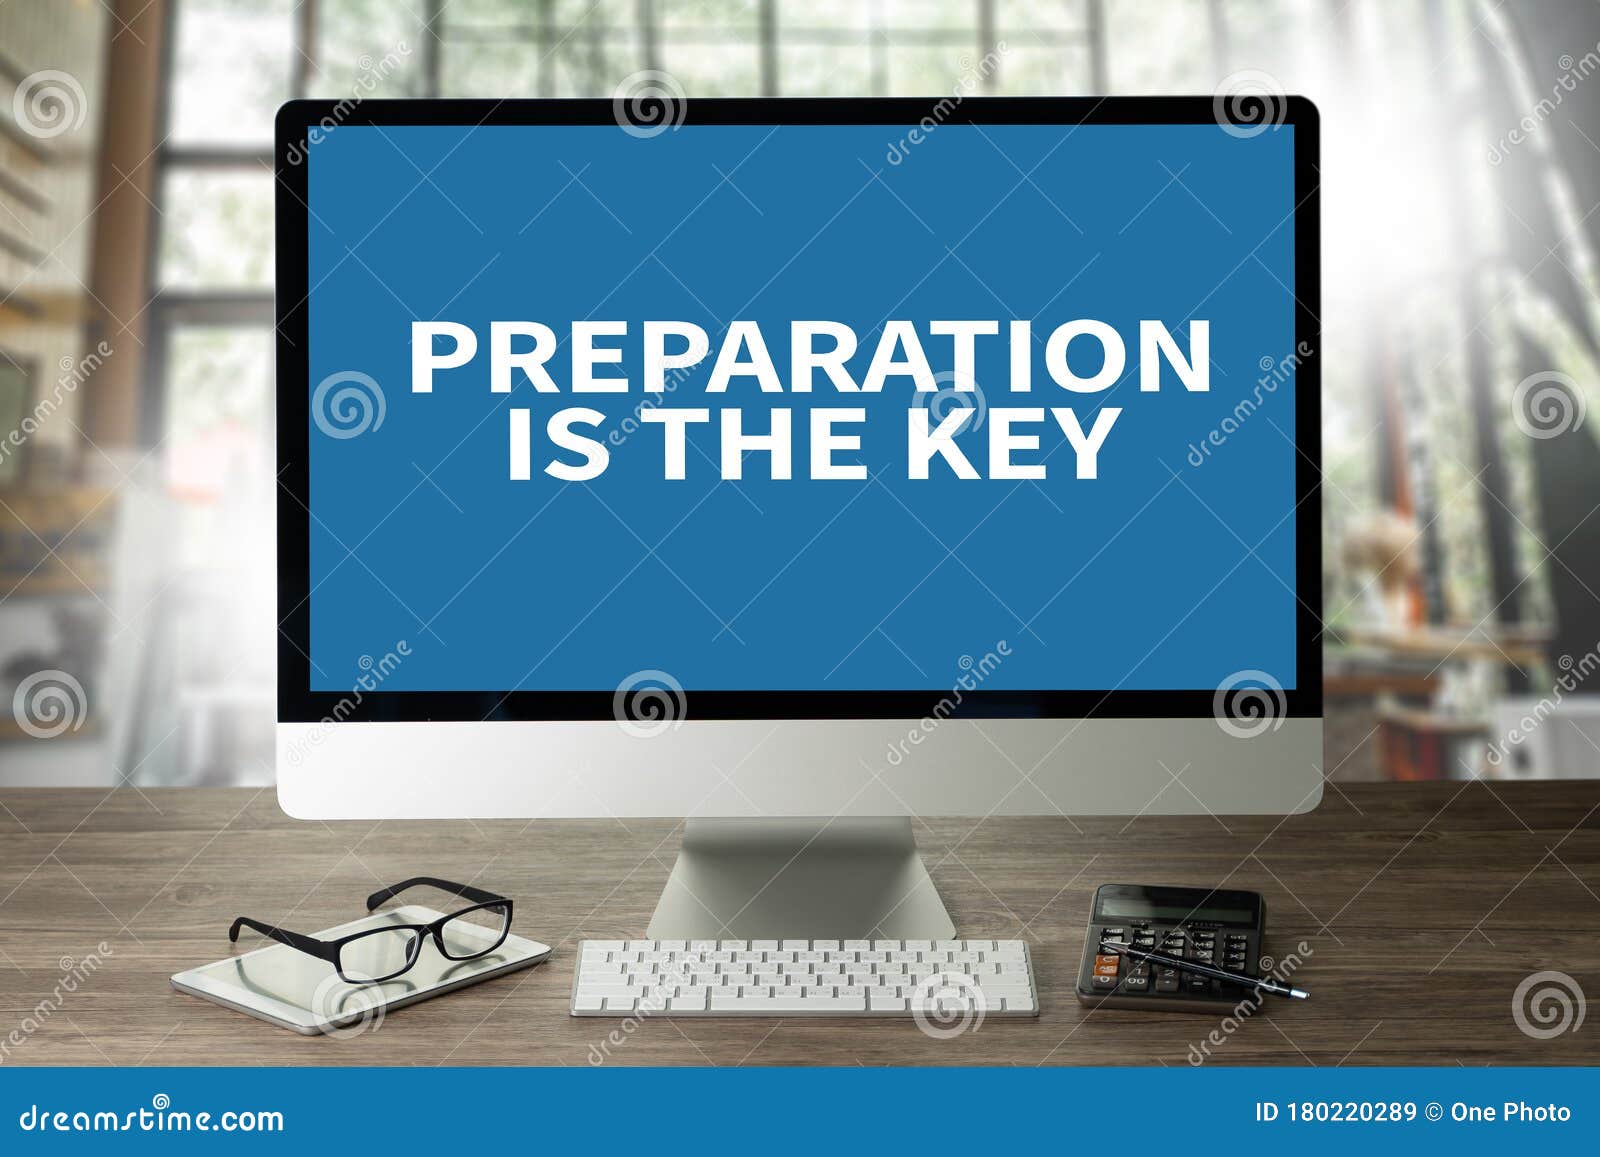 be prepared and preparation is the key plan, prepare, perform